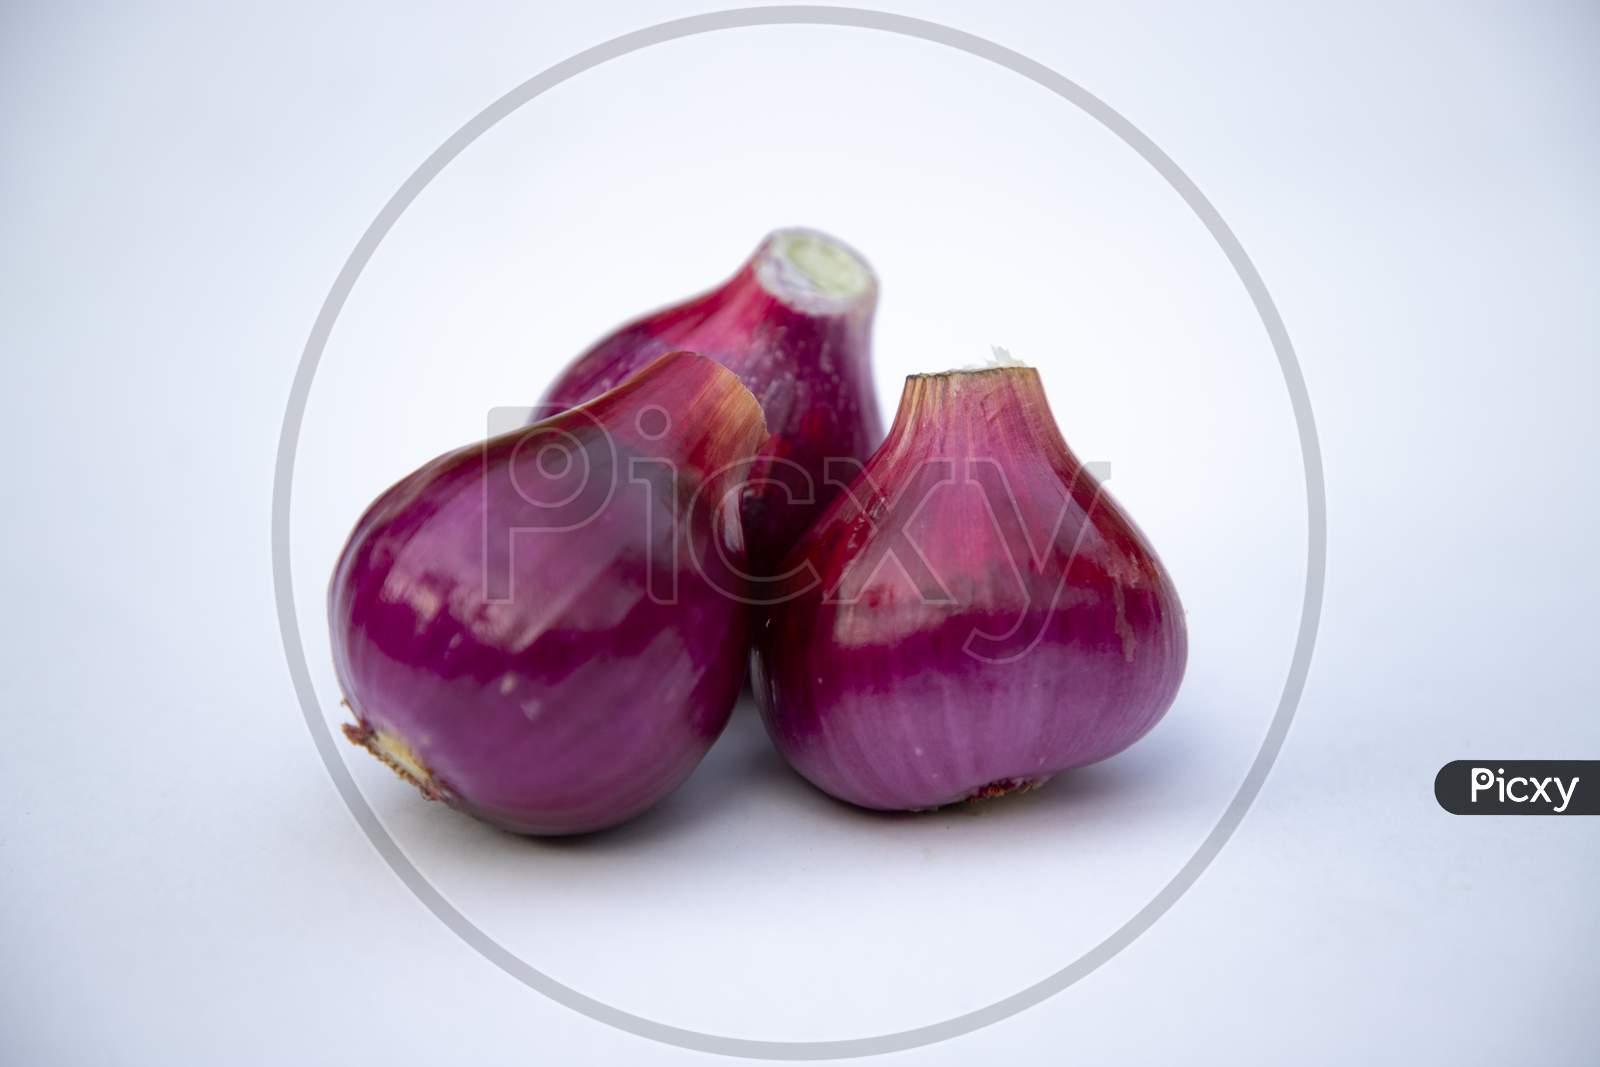 Red onion isolated on white background. close-up photoshoot